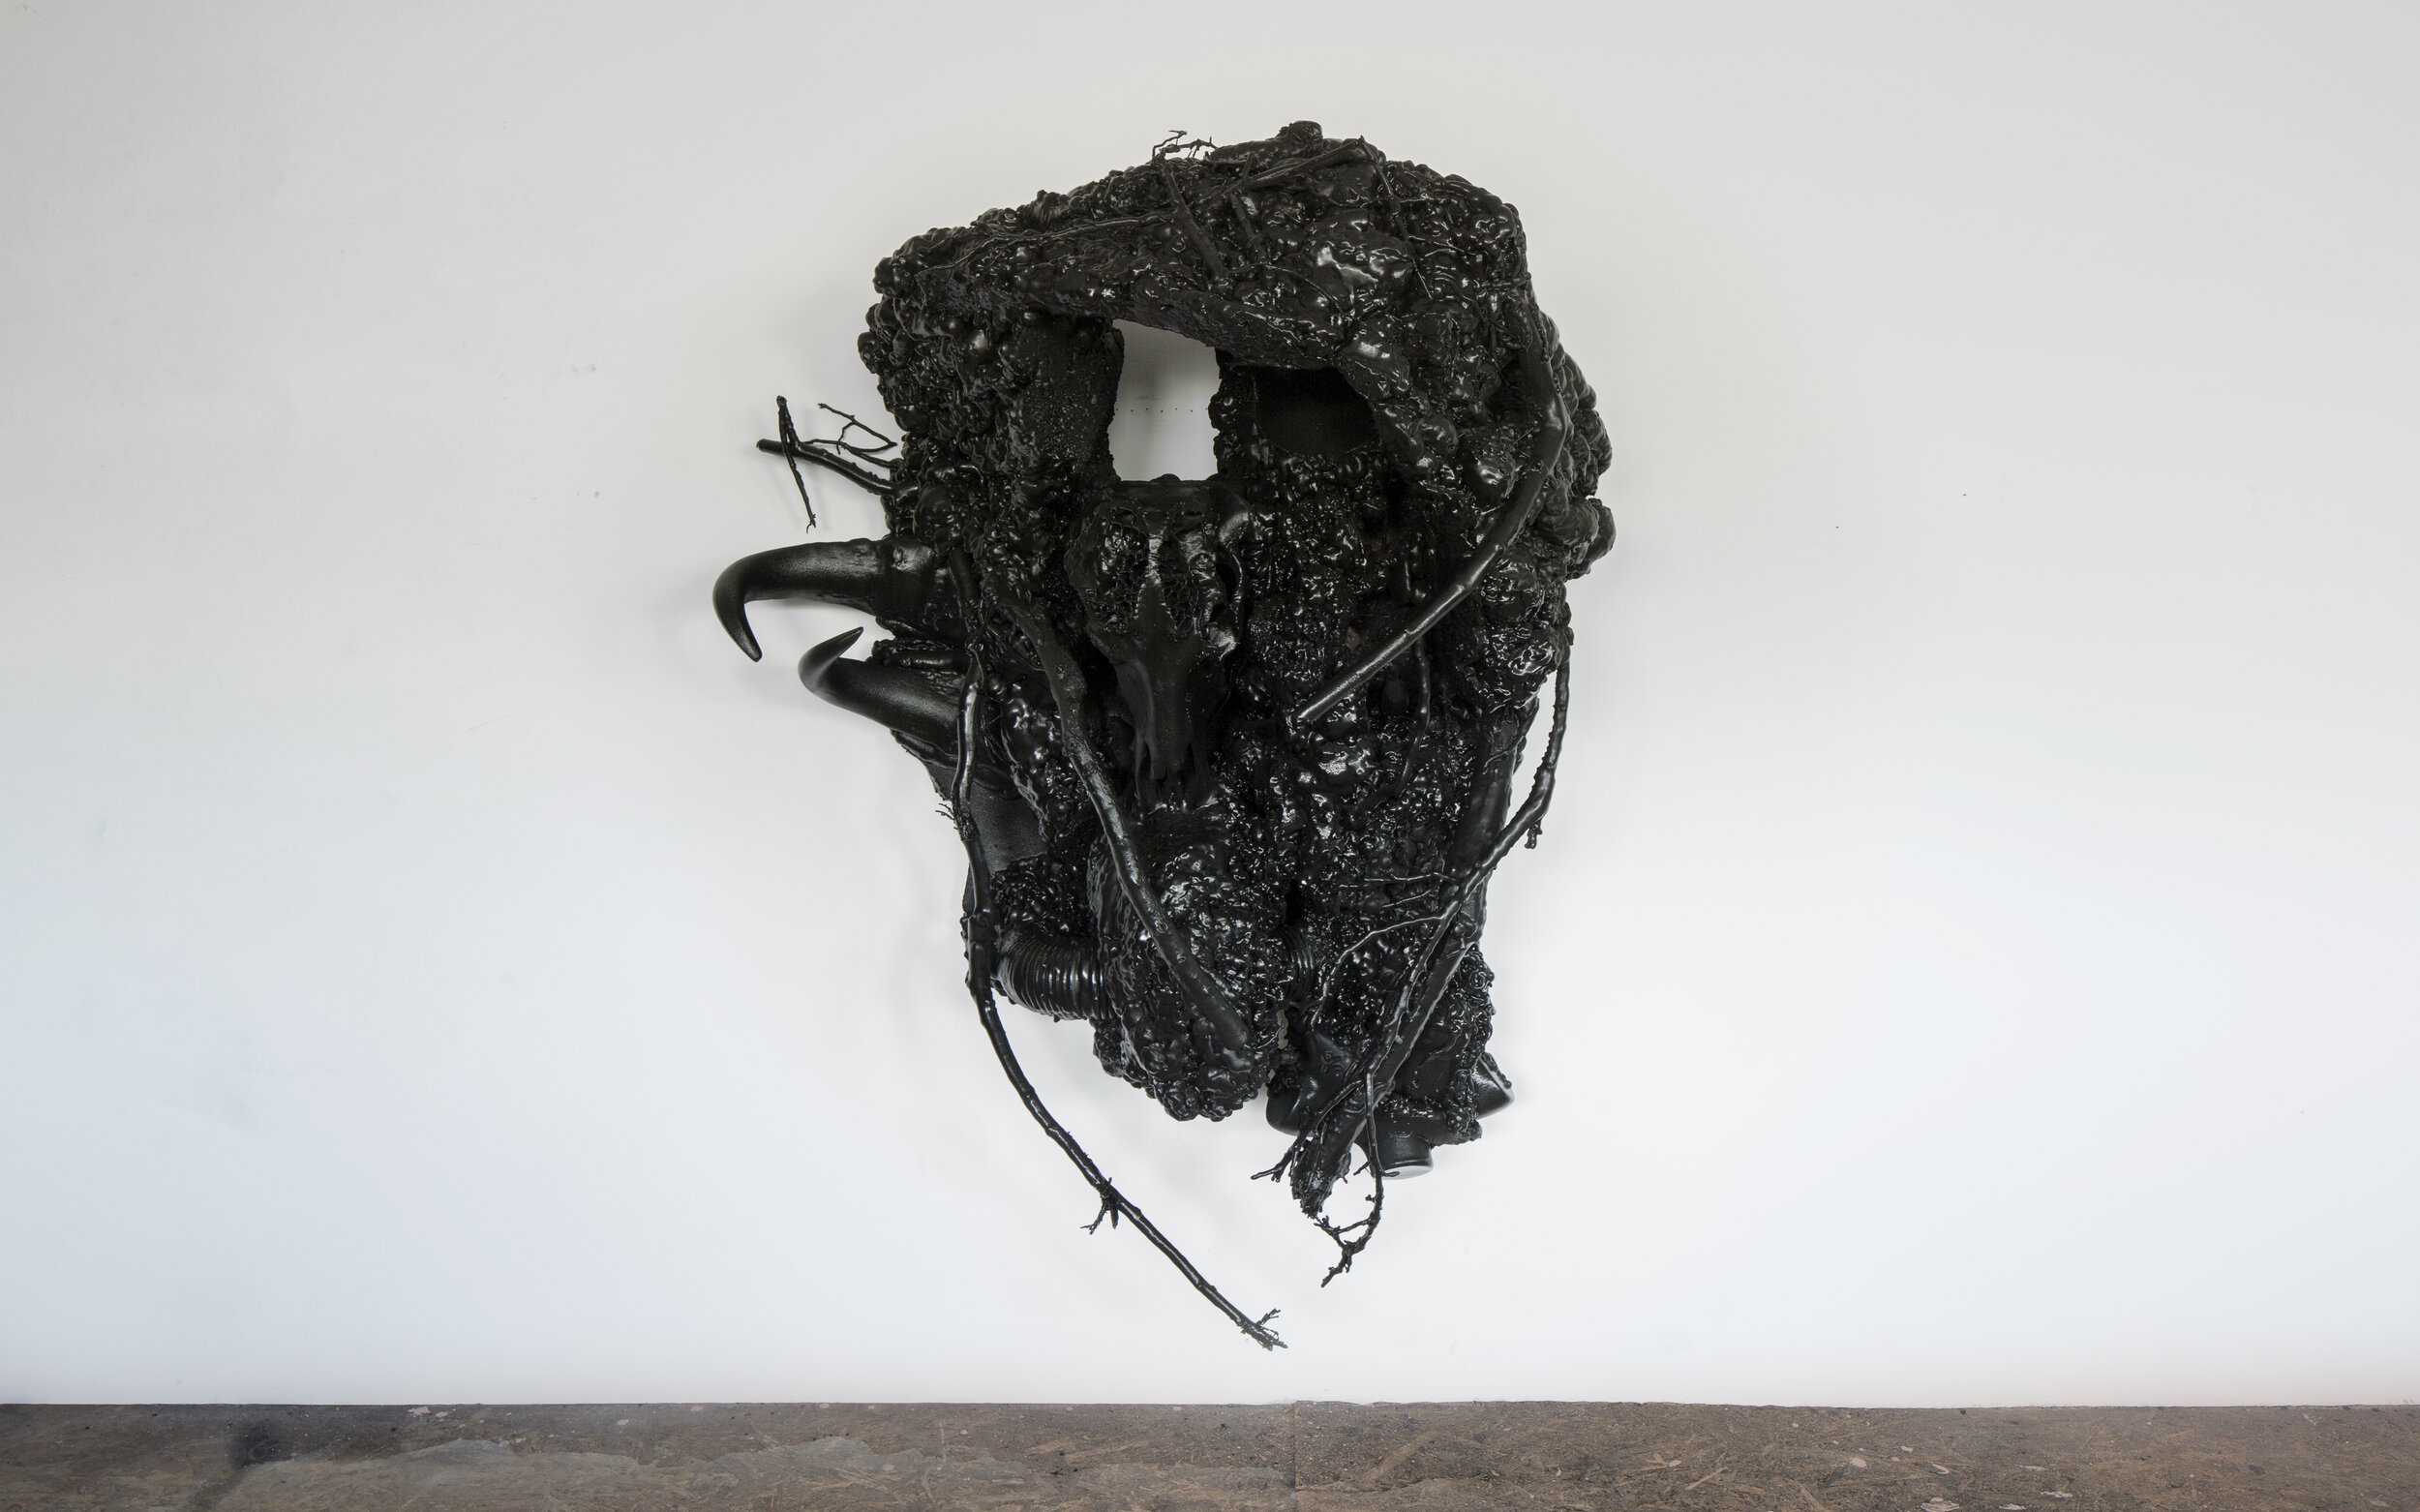  EXTINCTOR, 180 x 133 x 77 cm, 2020, Sectioned African buffalo skull and horns, canvas, polyurethane foam, mannequin bust, tree branches, plastic tube, crystallised spider web, earth, oil and acrylic paint, mechanical spider arms, mounted on pvc xps 